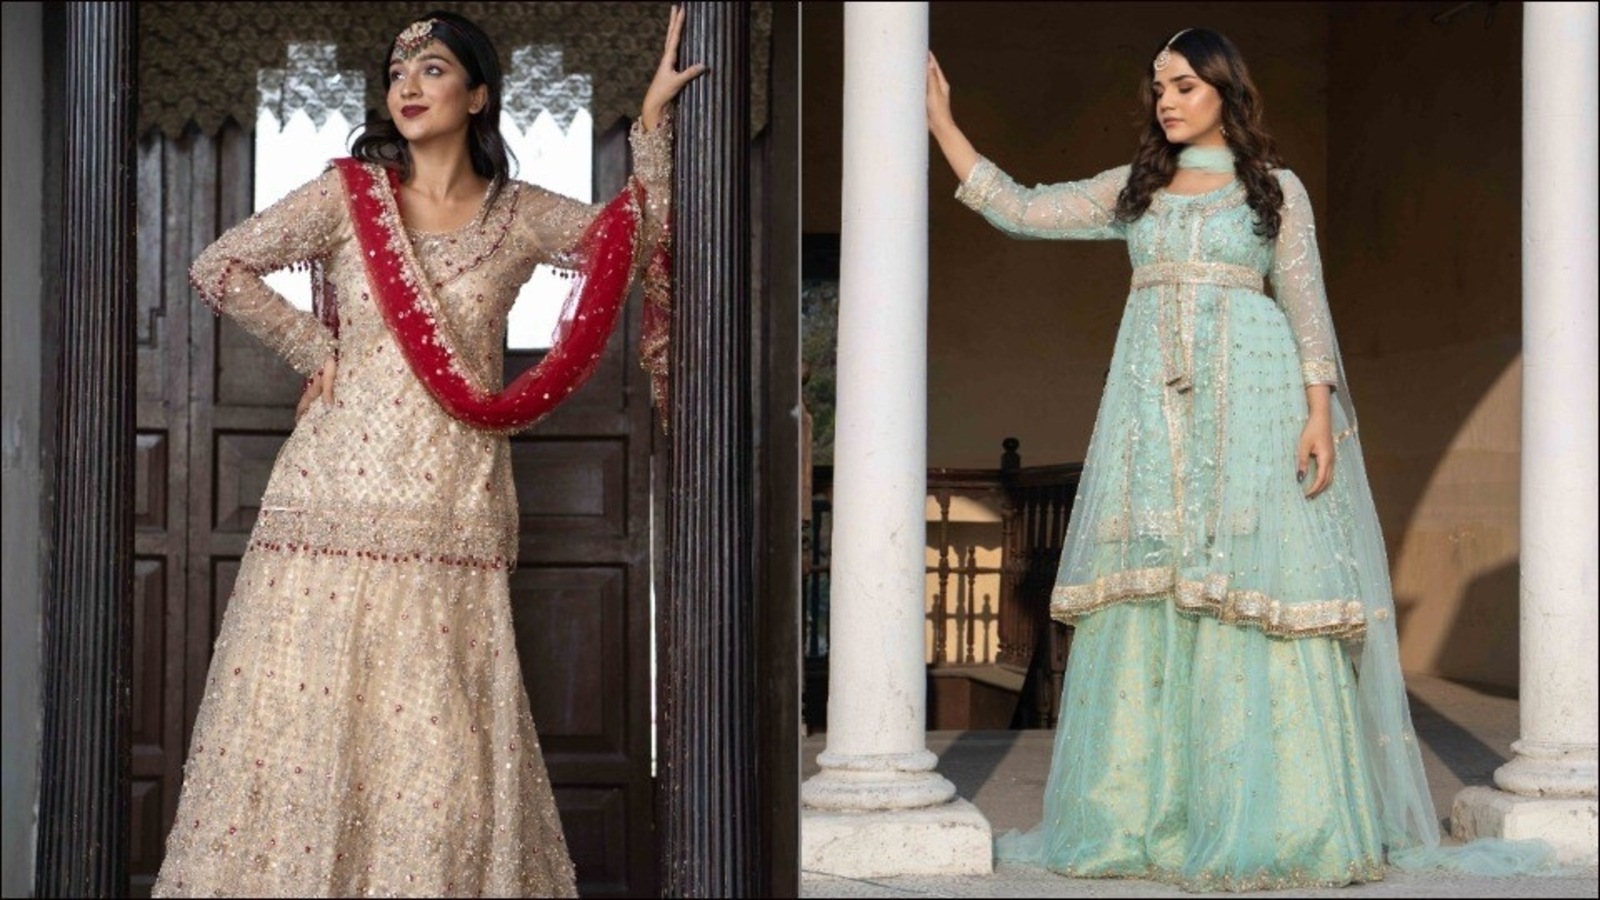 Fashion tips for bride-to-be: Check out these new trends of bridal